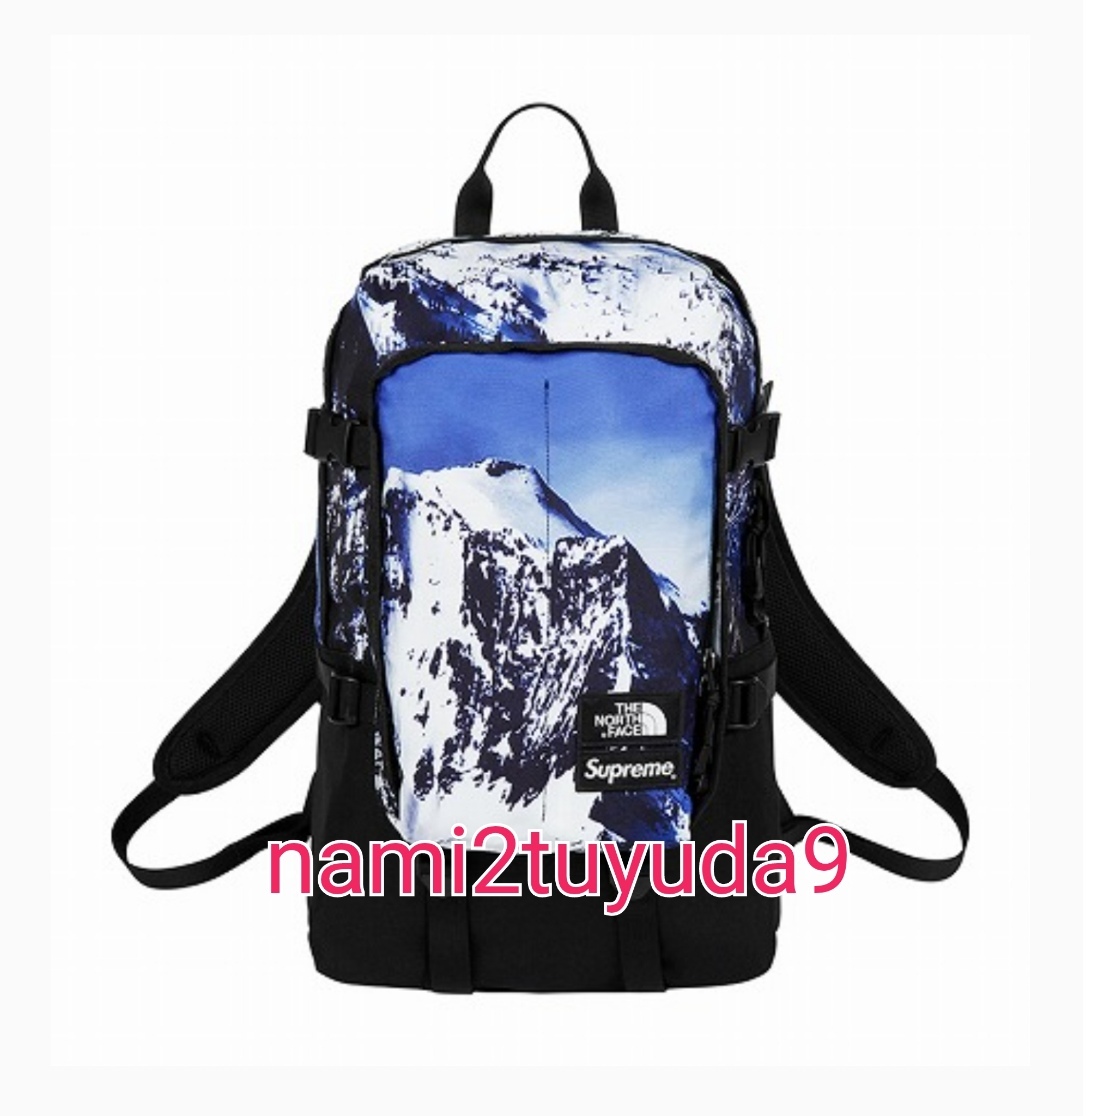 【10％OFF】 【新品・未使用】 激レア Supreme The North Face Mountain Expedition Backpack バックパック 17AW 雪山 ノースフェイス かばん、バッグ